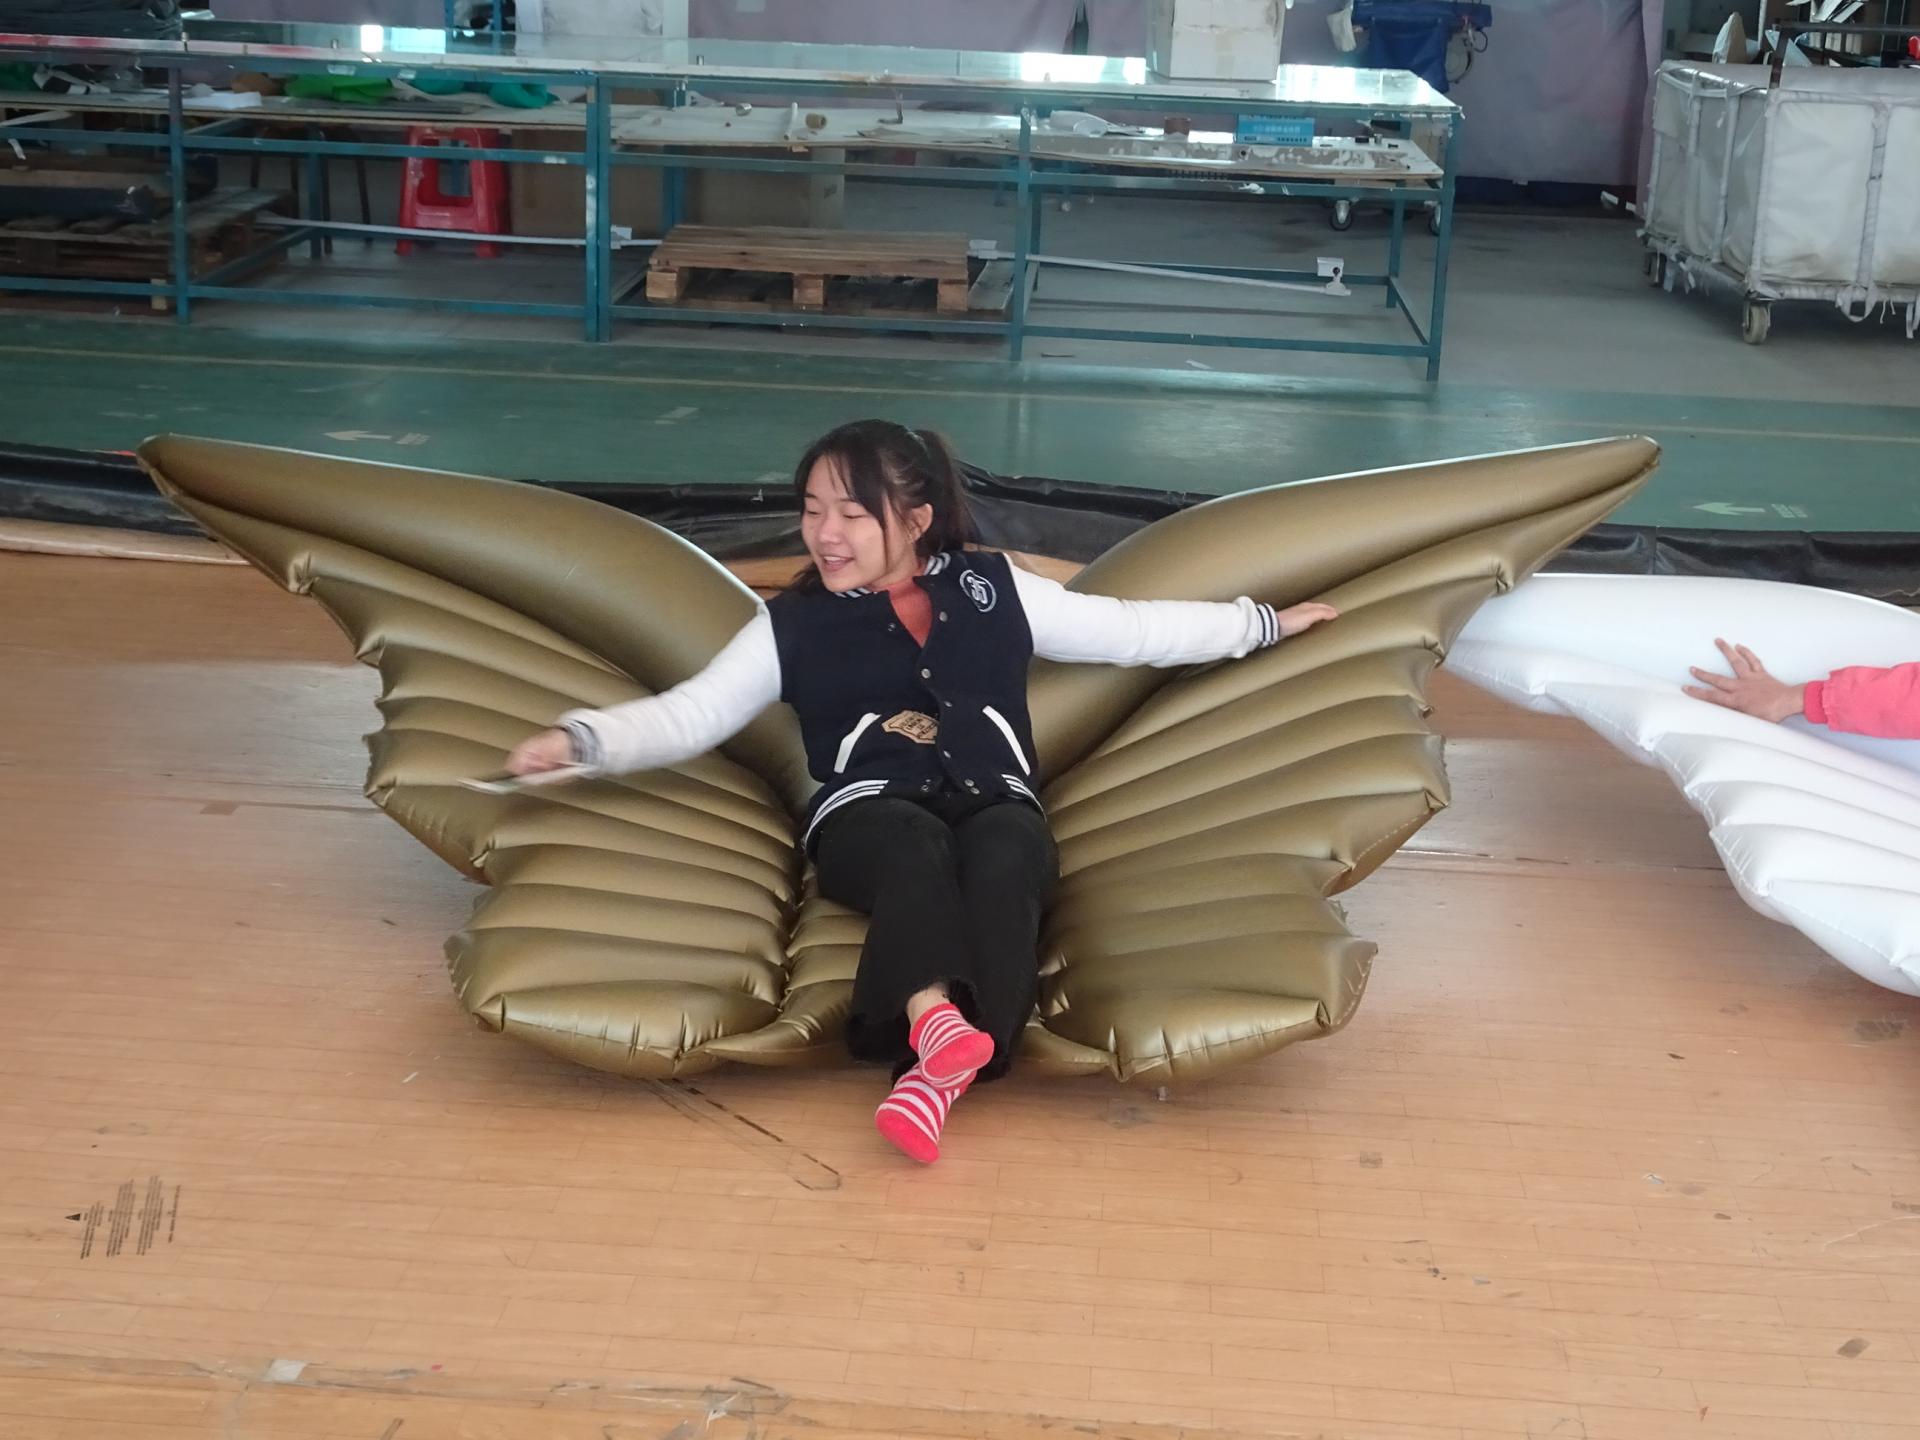 Inflatable Golden Angel Wings Pool Floats